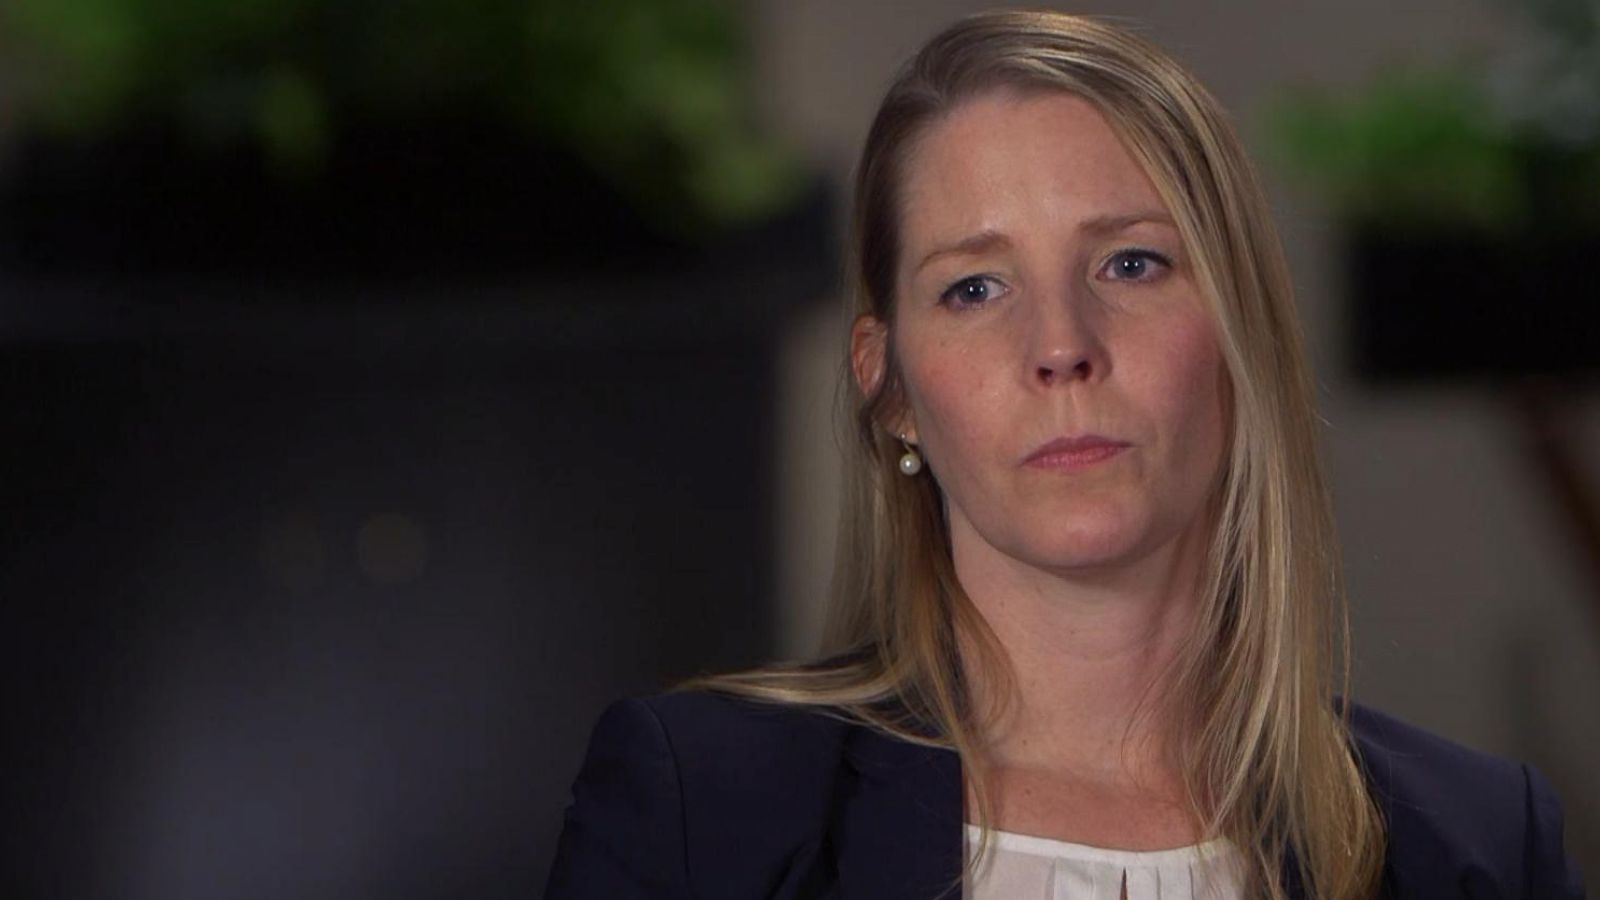 PHOTO: Betty Pina, an Alaska Airlines pilot who is suing her employer after accusing her co-pilot of rape, spoke out in an interview with ABC News.